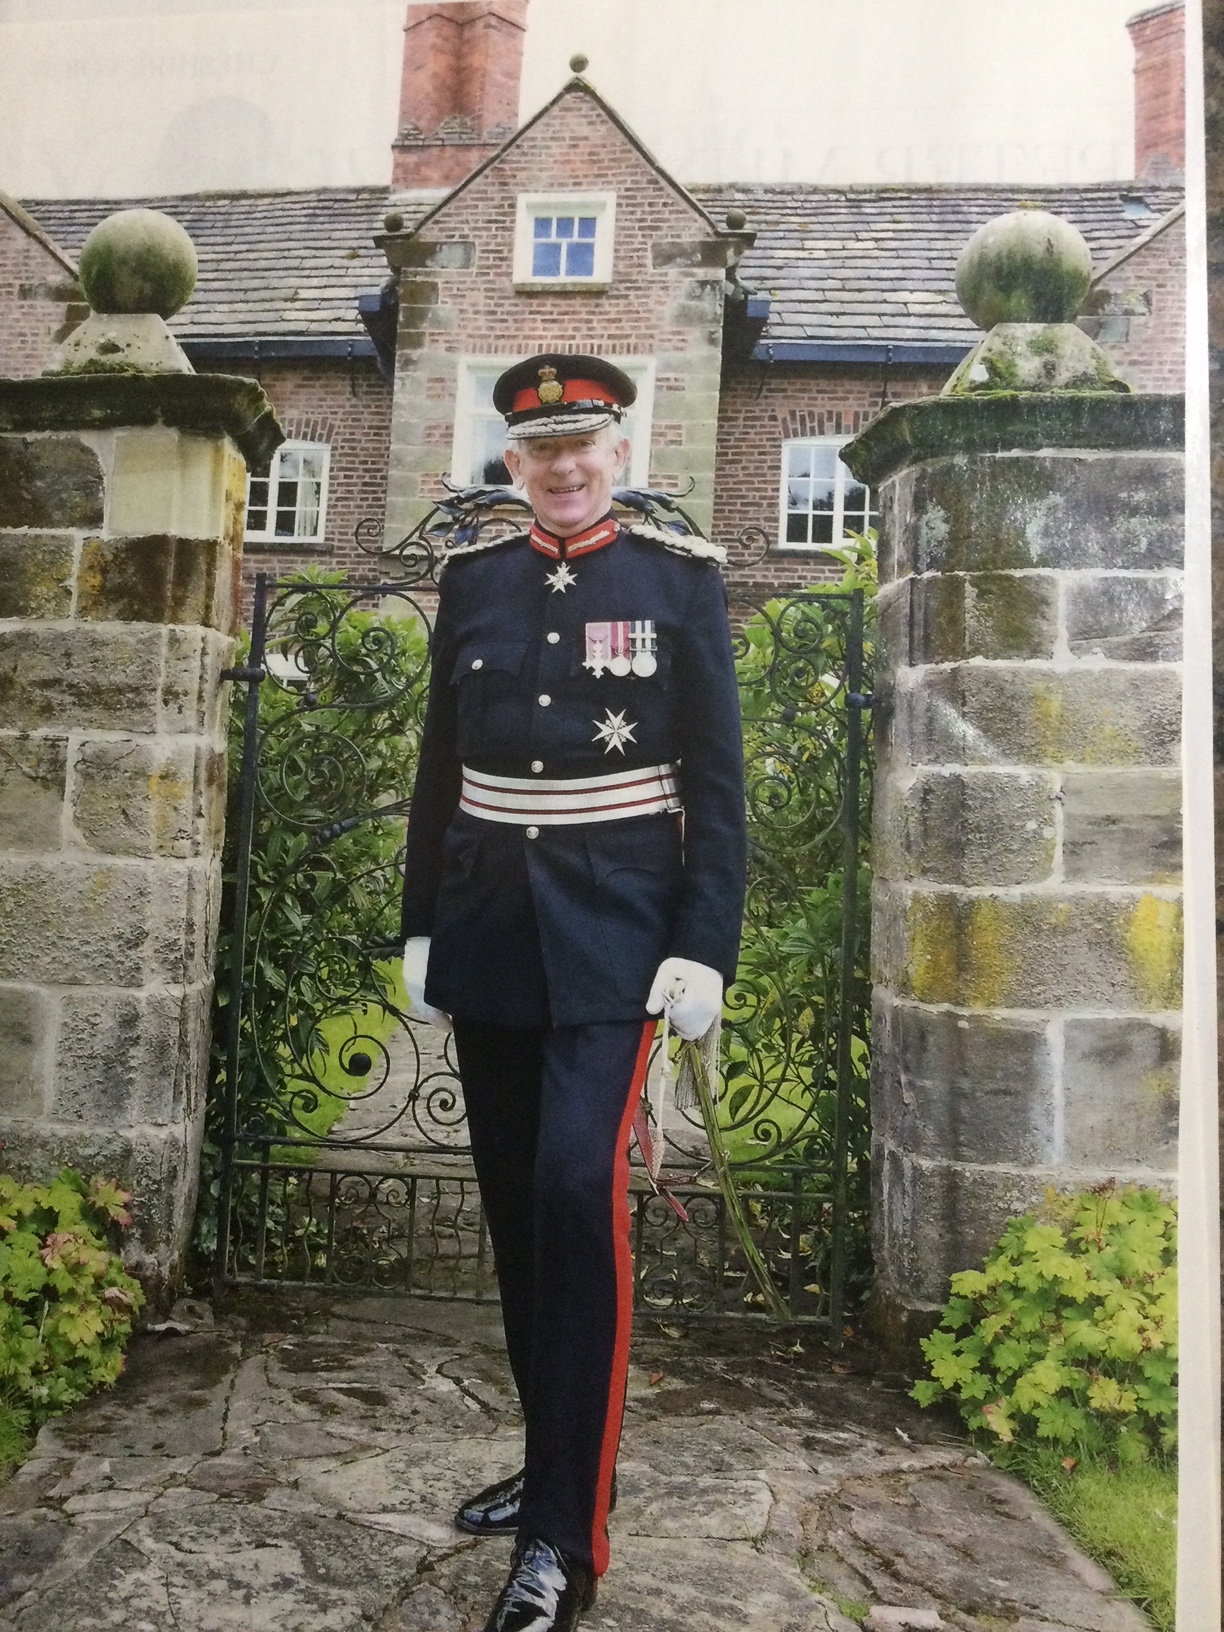 Our Patron’s term as Lord Lieutenant of Cheshire has ended